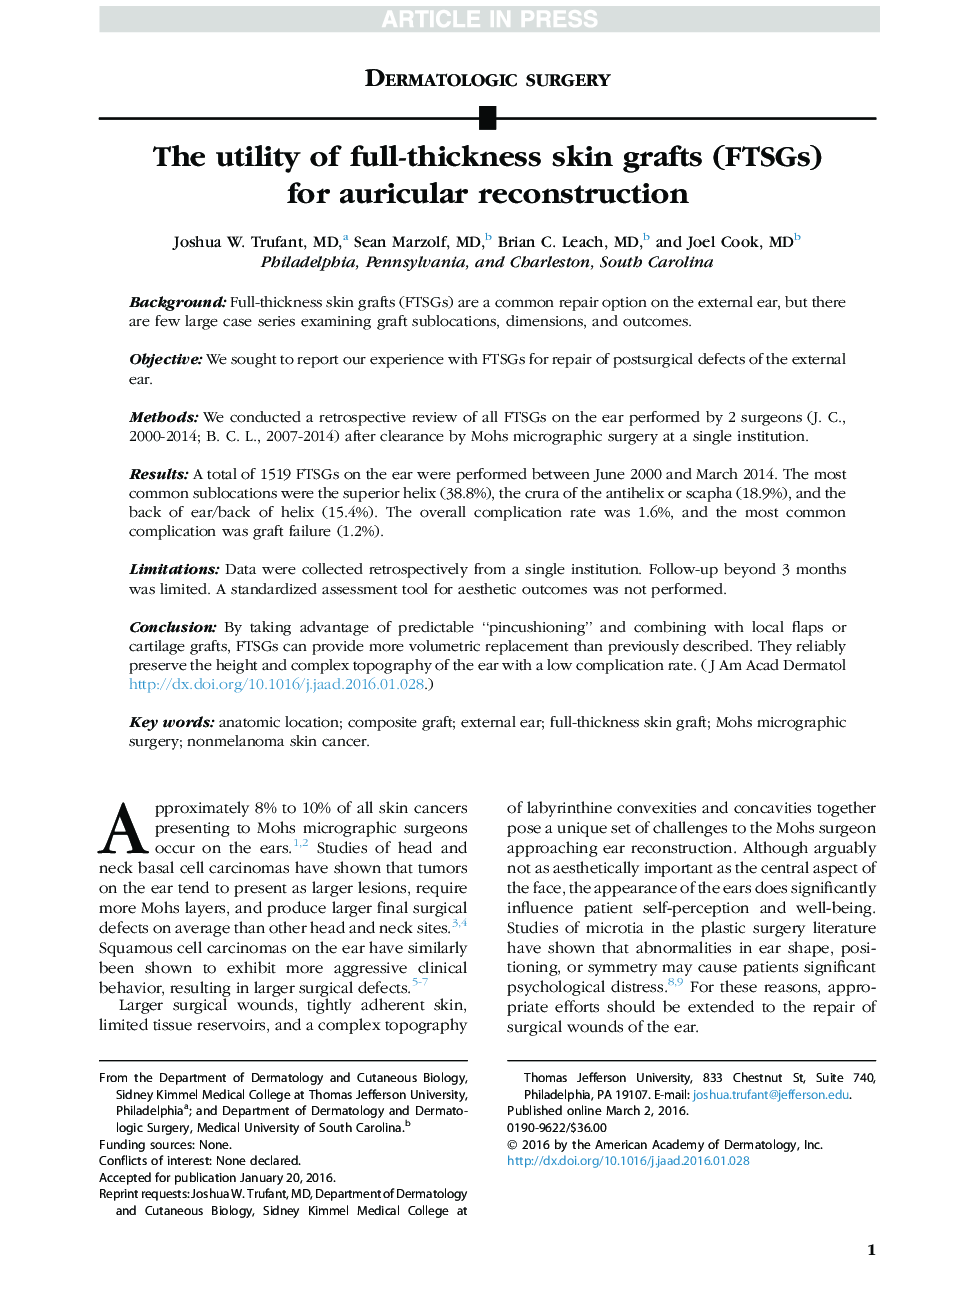 The utility of full-thickness skin grafts (FTSGs) for auricular reconstruction